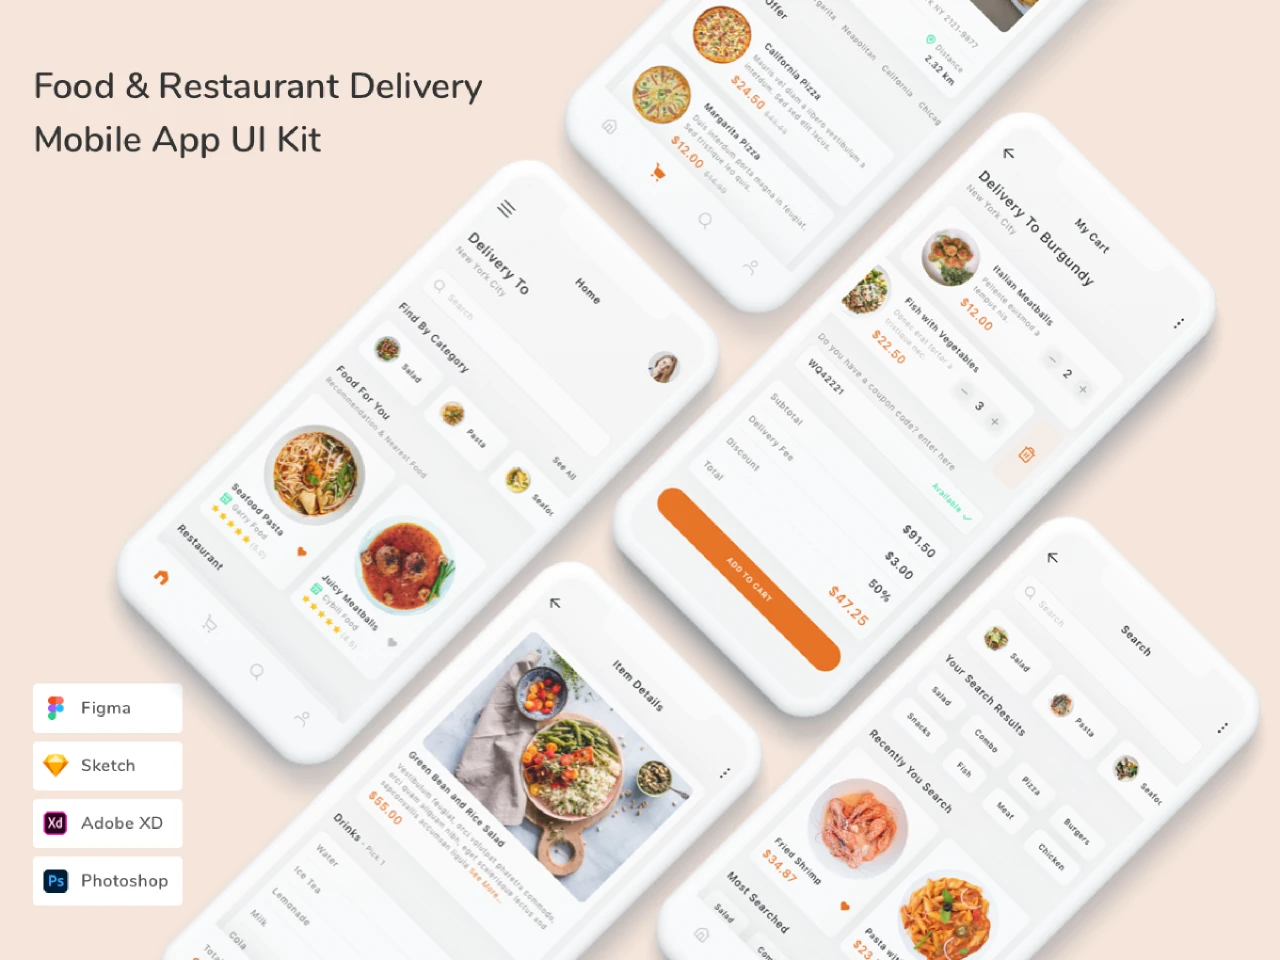 Food & Restaurant Delivery Mobile App UI Kit for Figma and Adobe XD